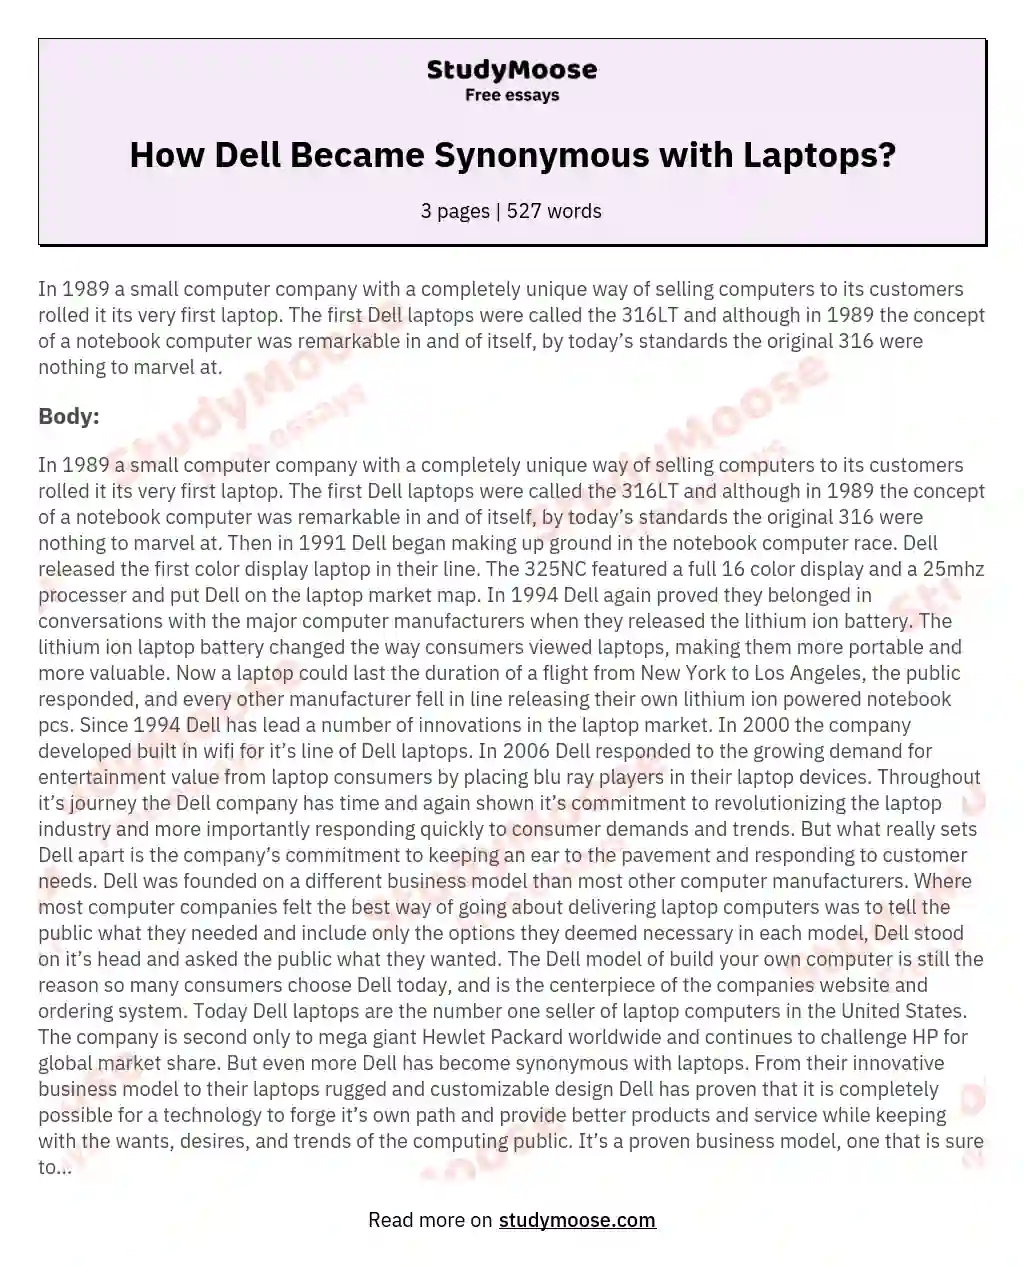 How Dell Became Synonymous with Laptops? essay